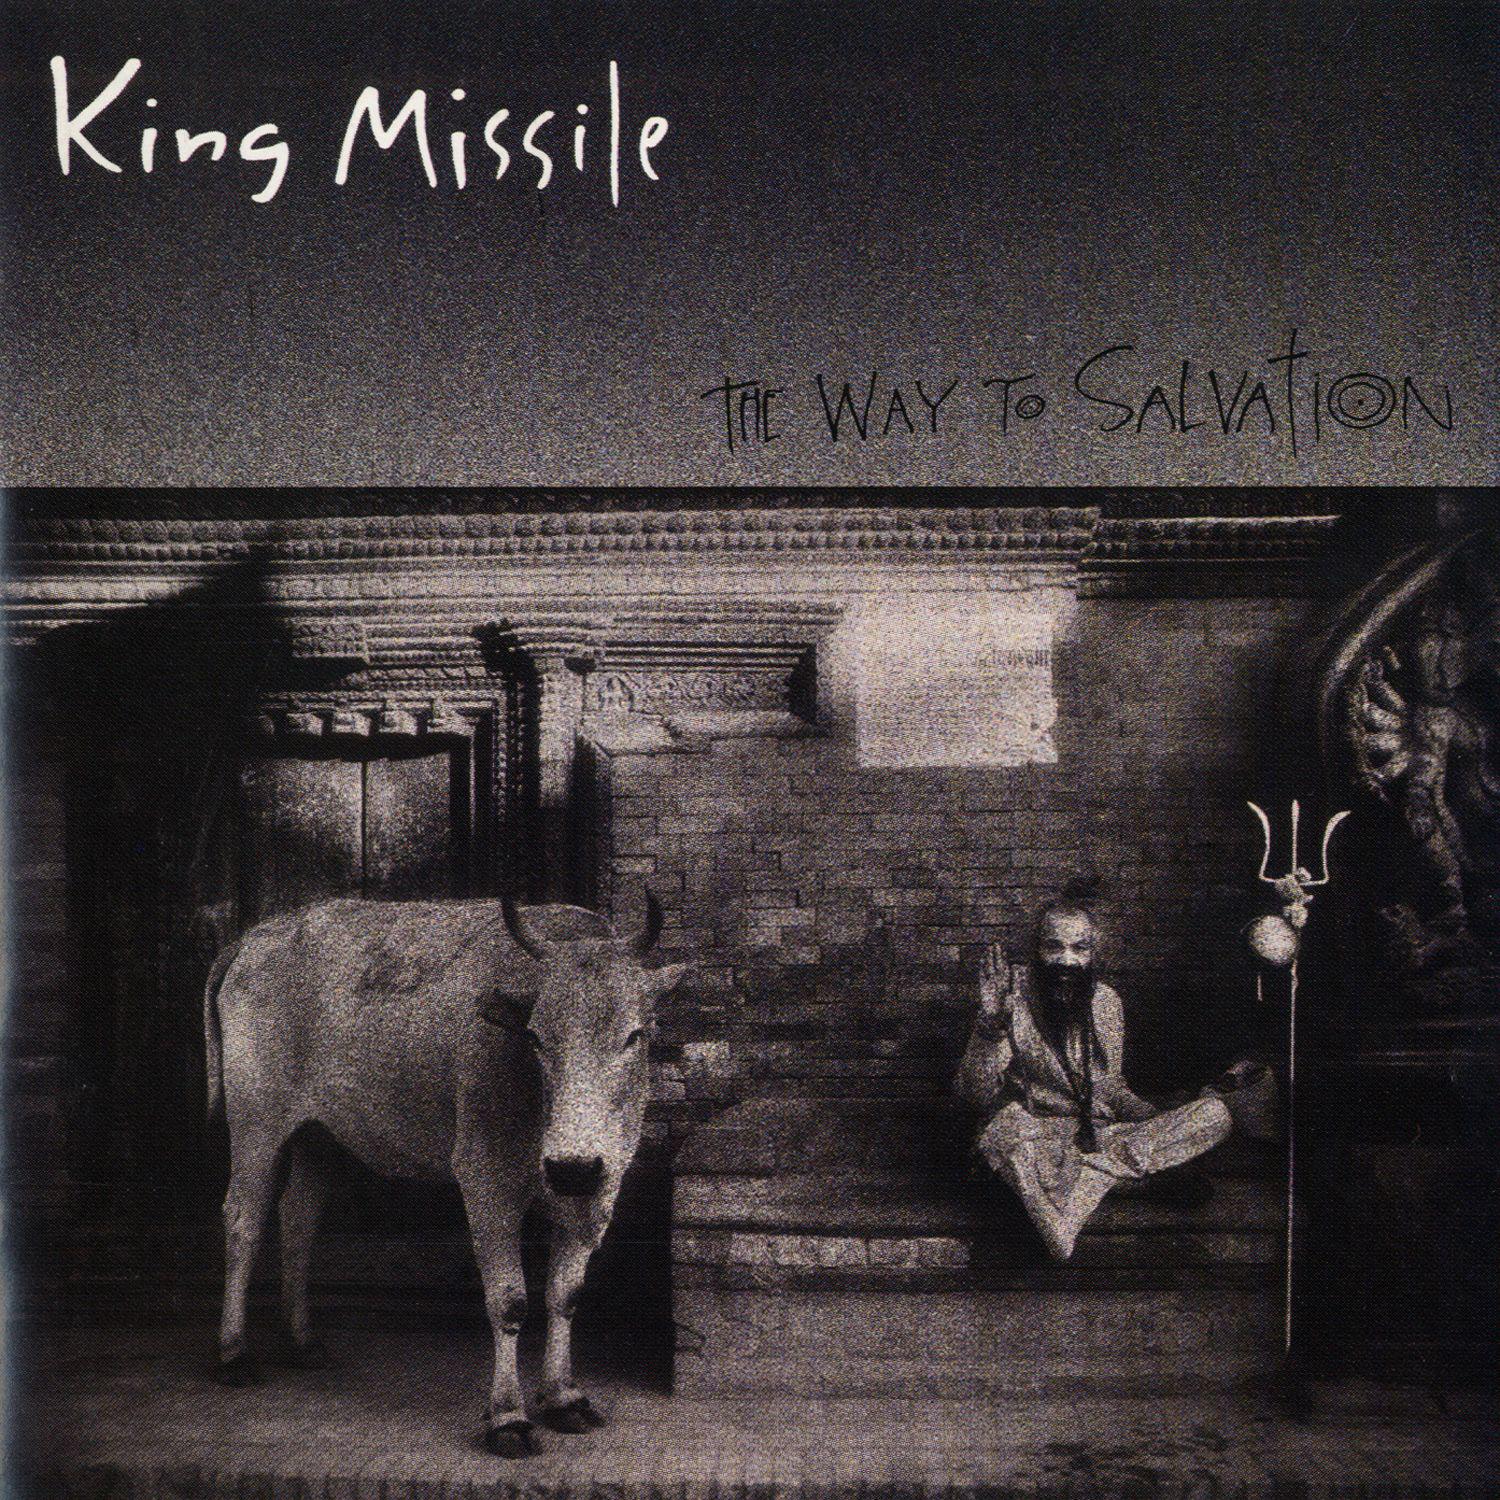 King Missile - The Way To Salvation (LP Version)